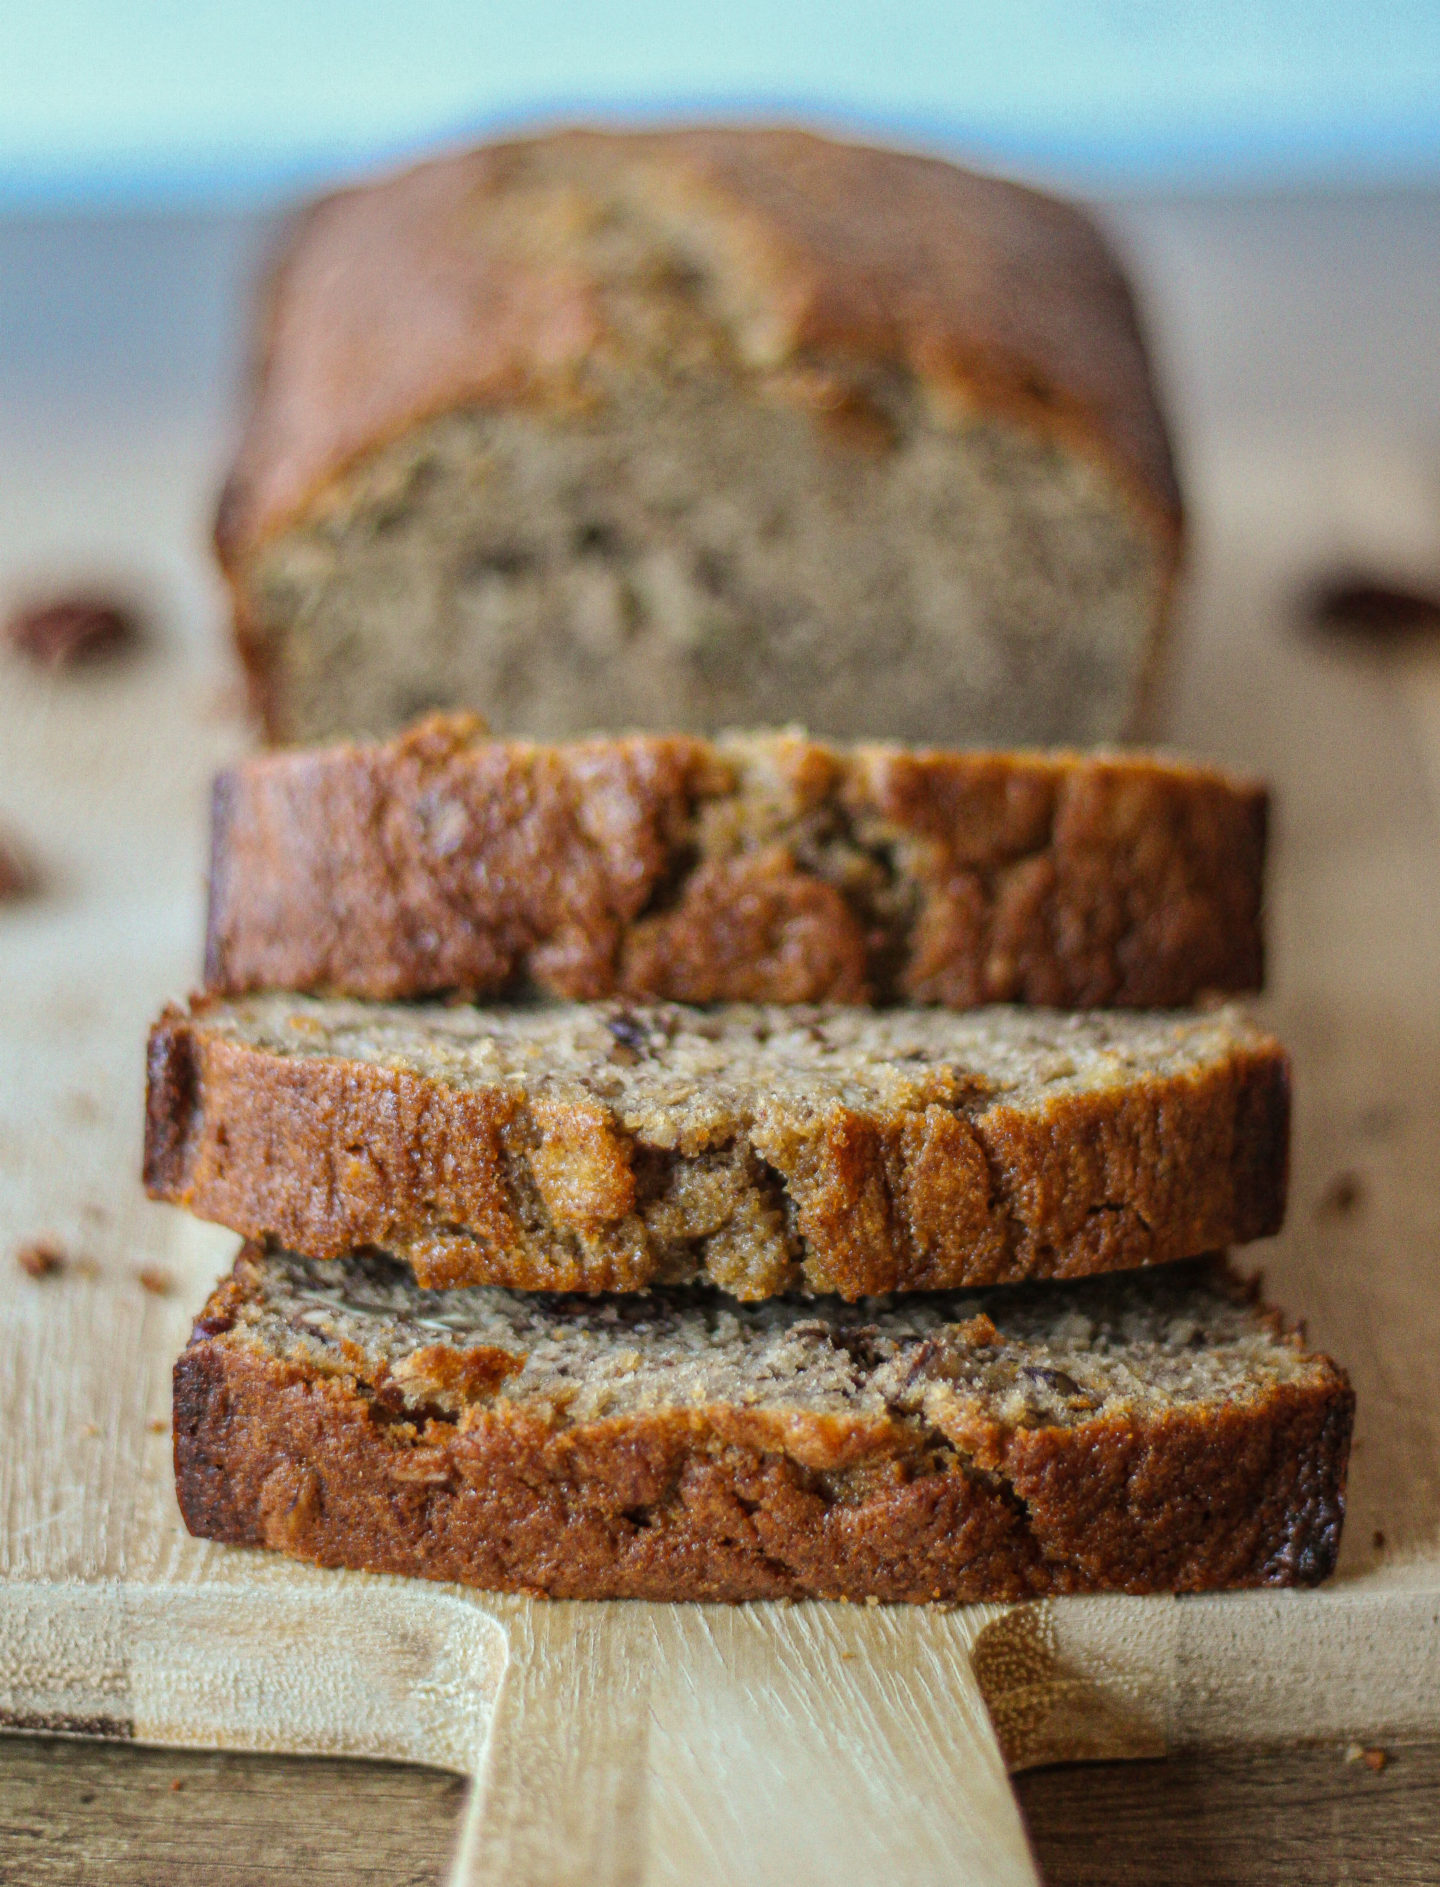 close up of stack of slices of banana loaf cake with loaf out of focus in background